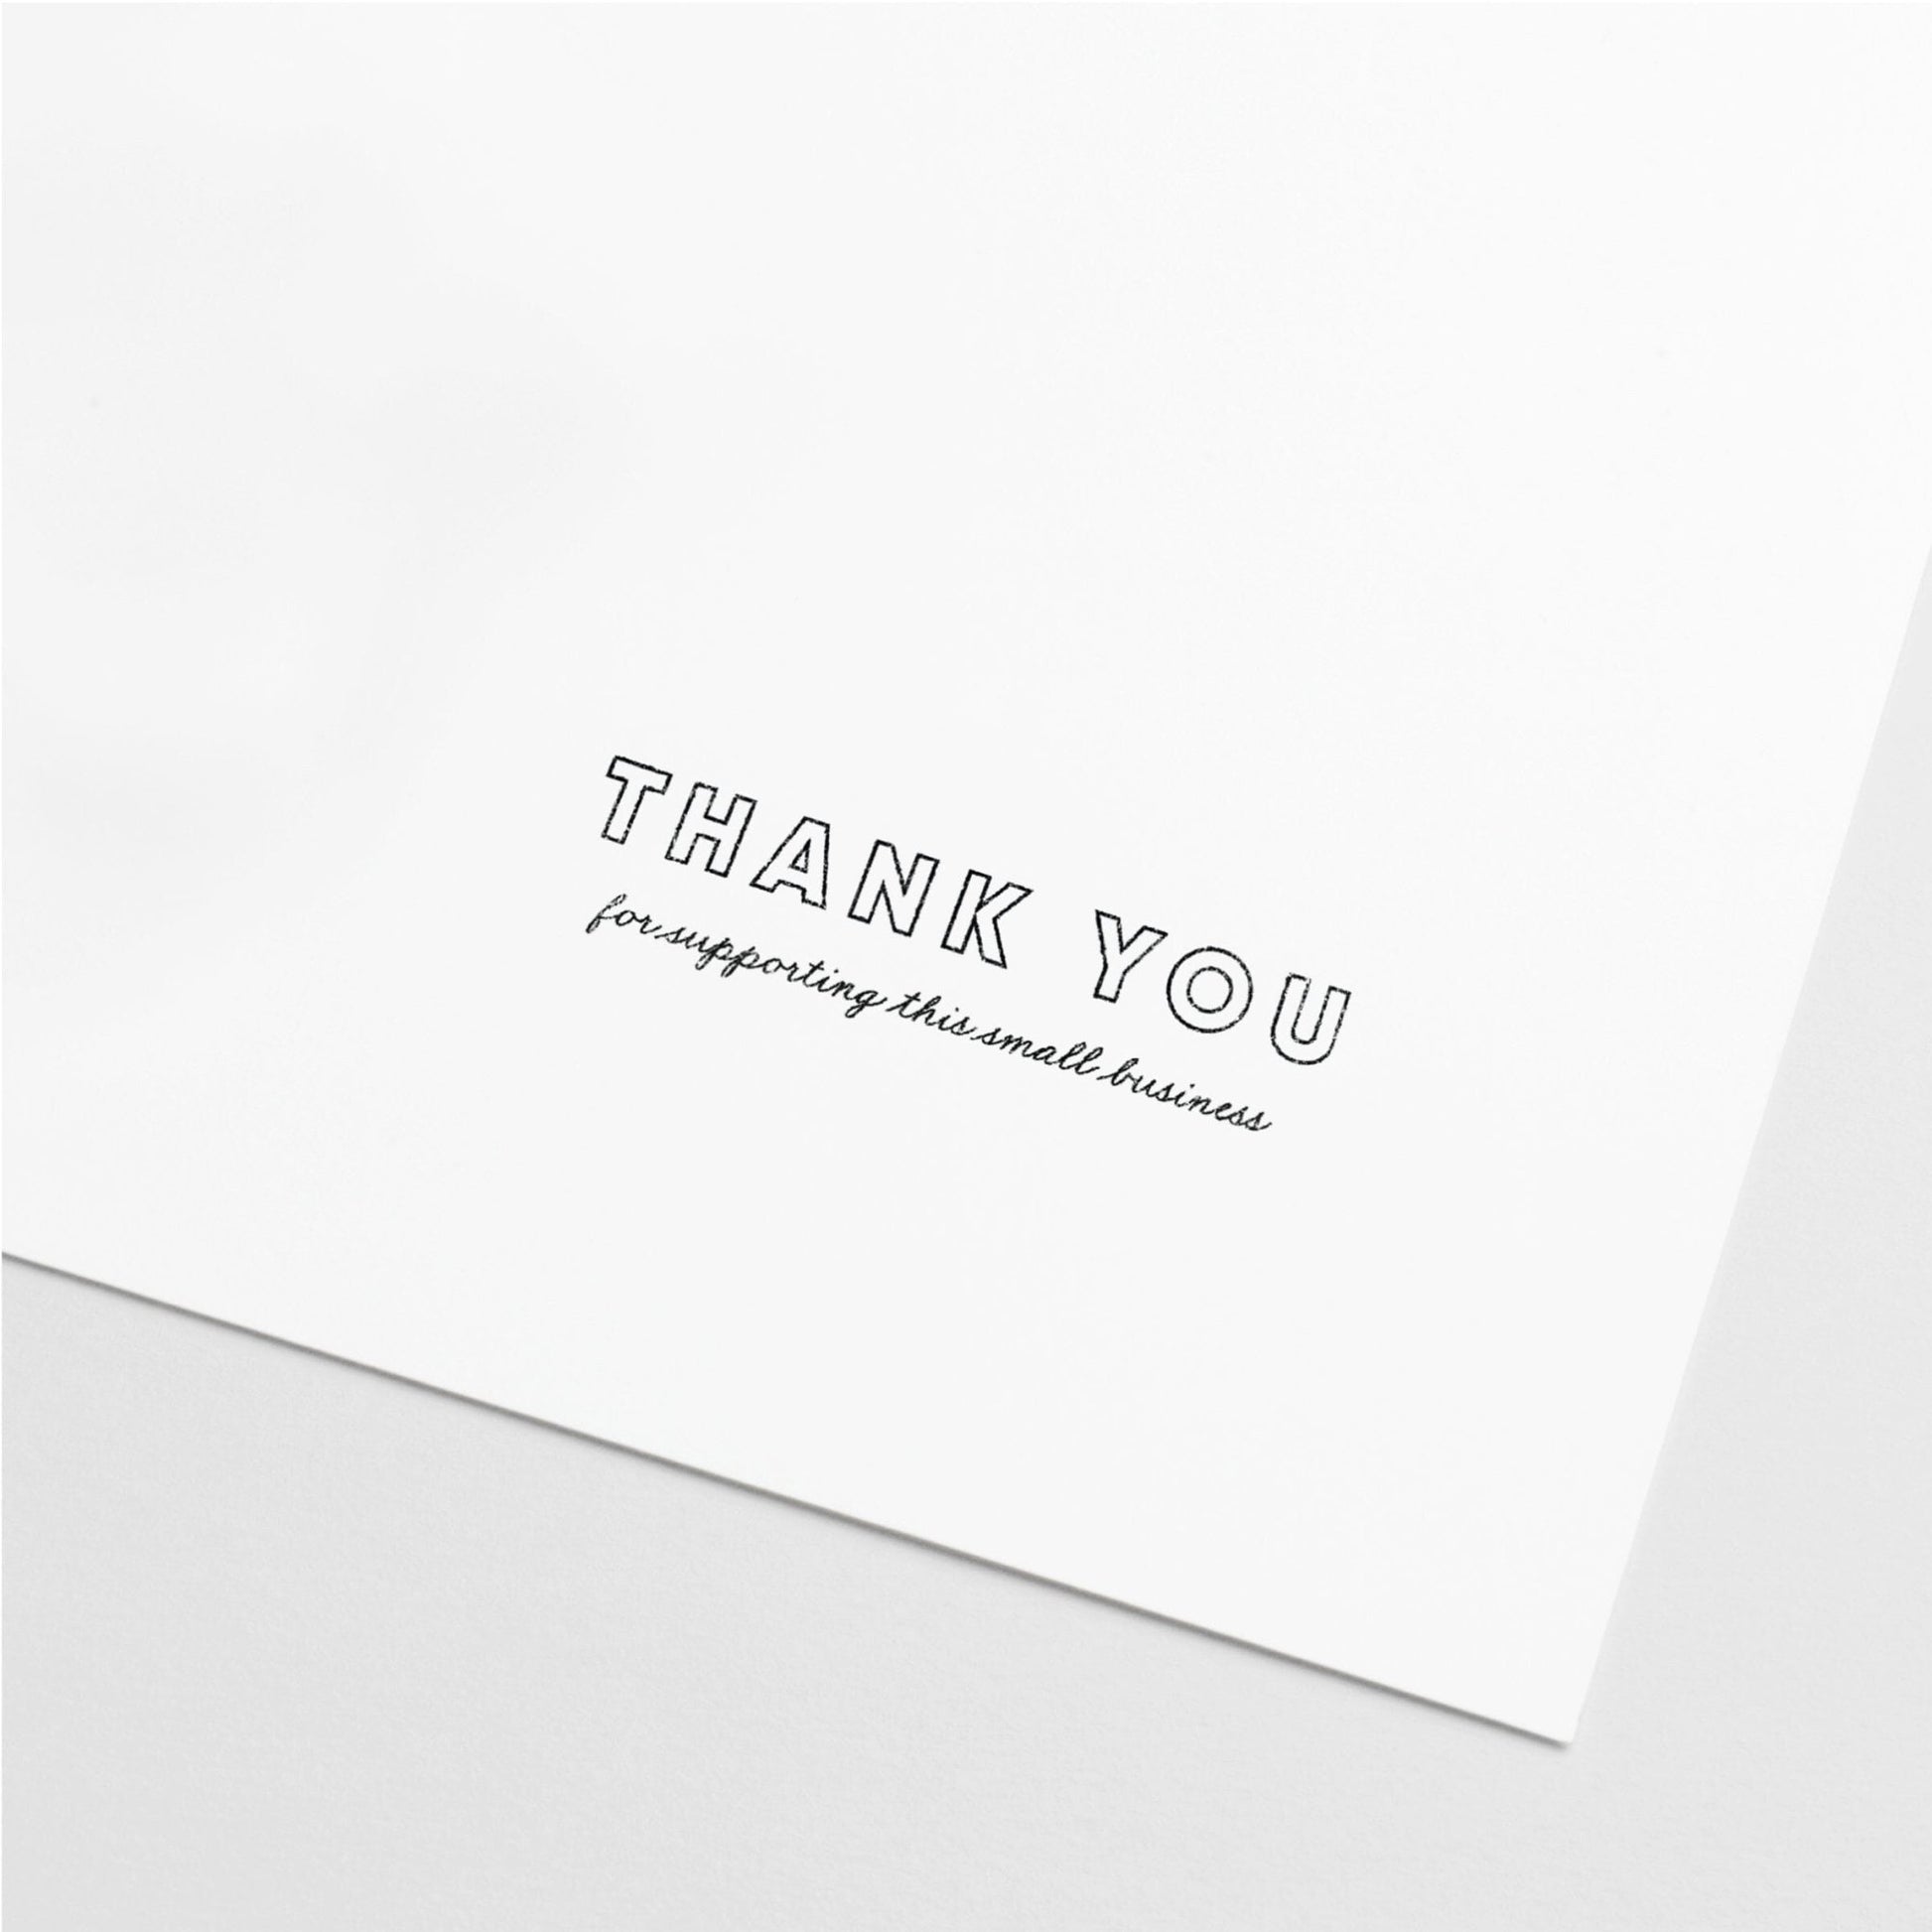 Thank You Stamp, Business Stamper The Design Craft